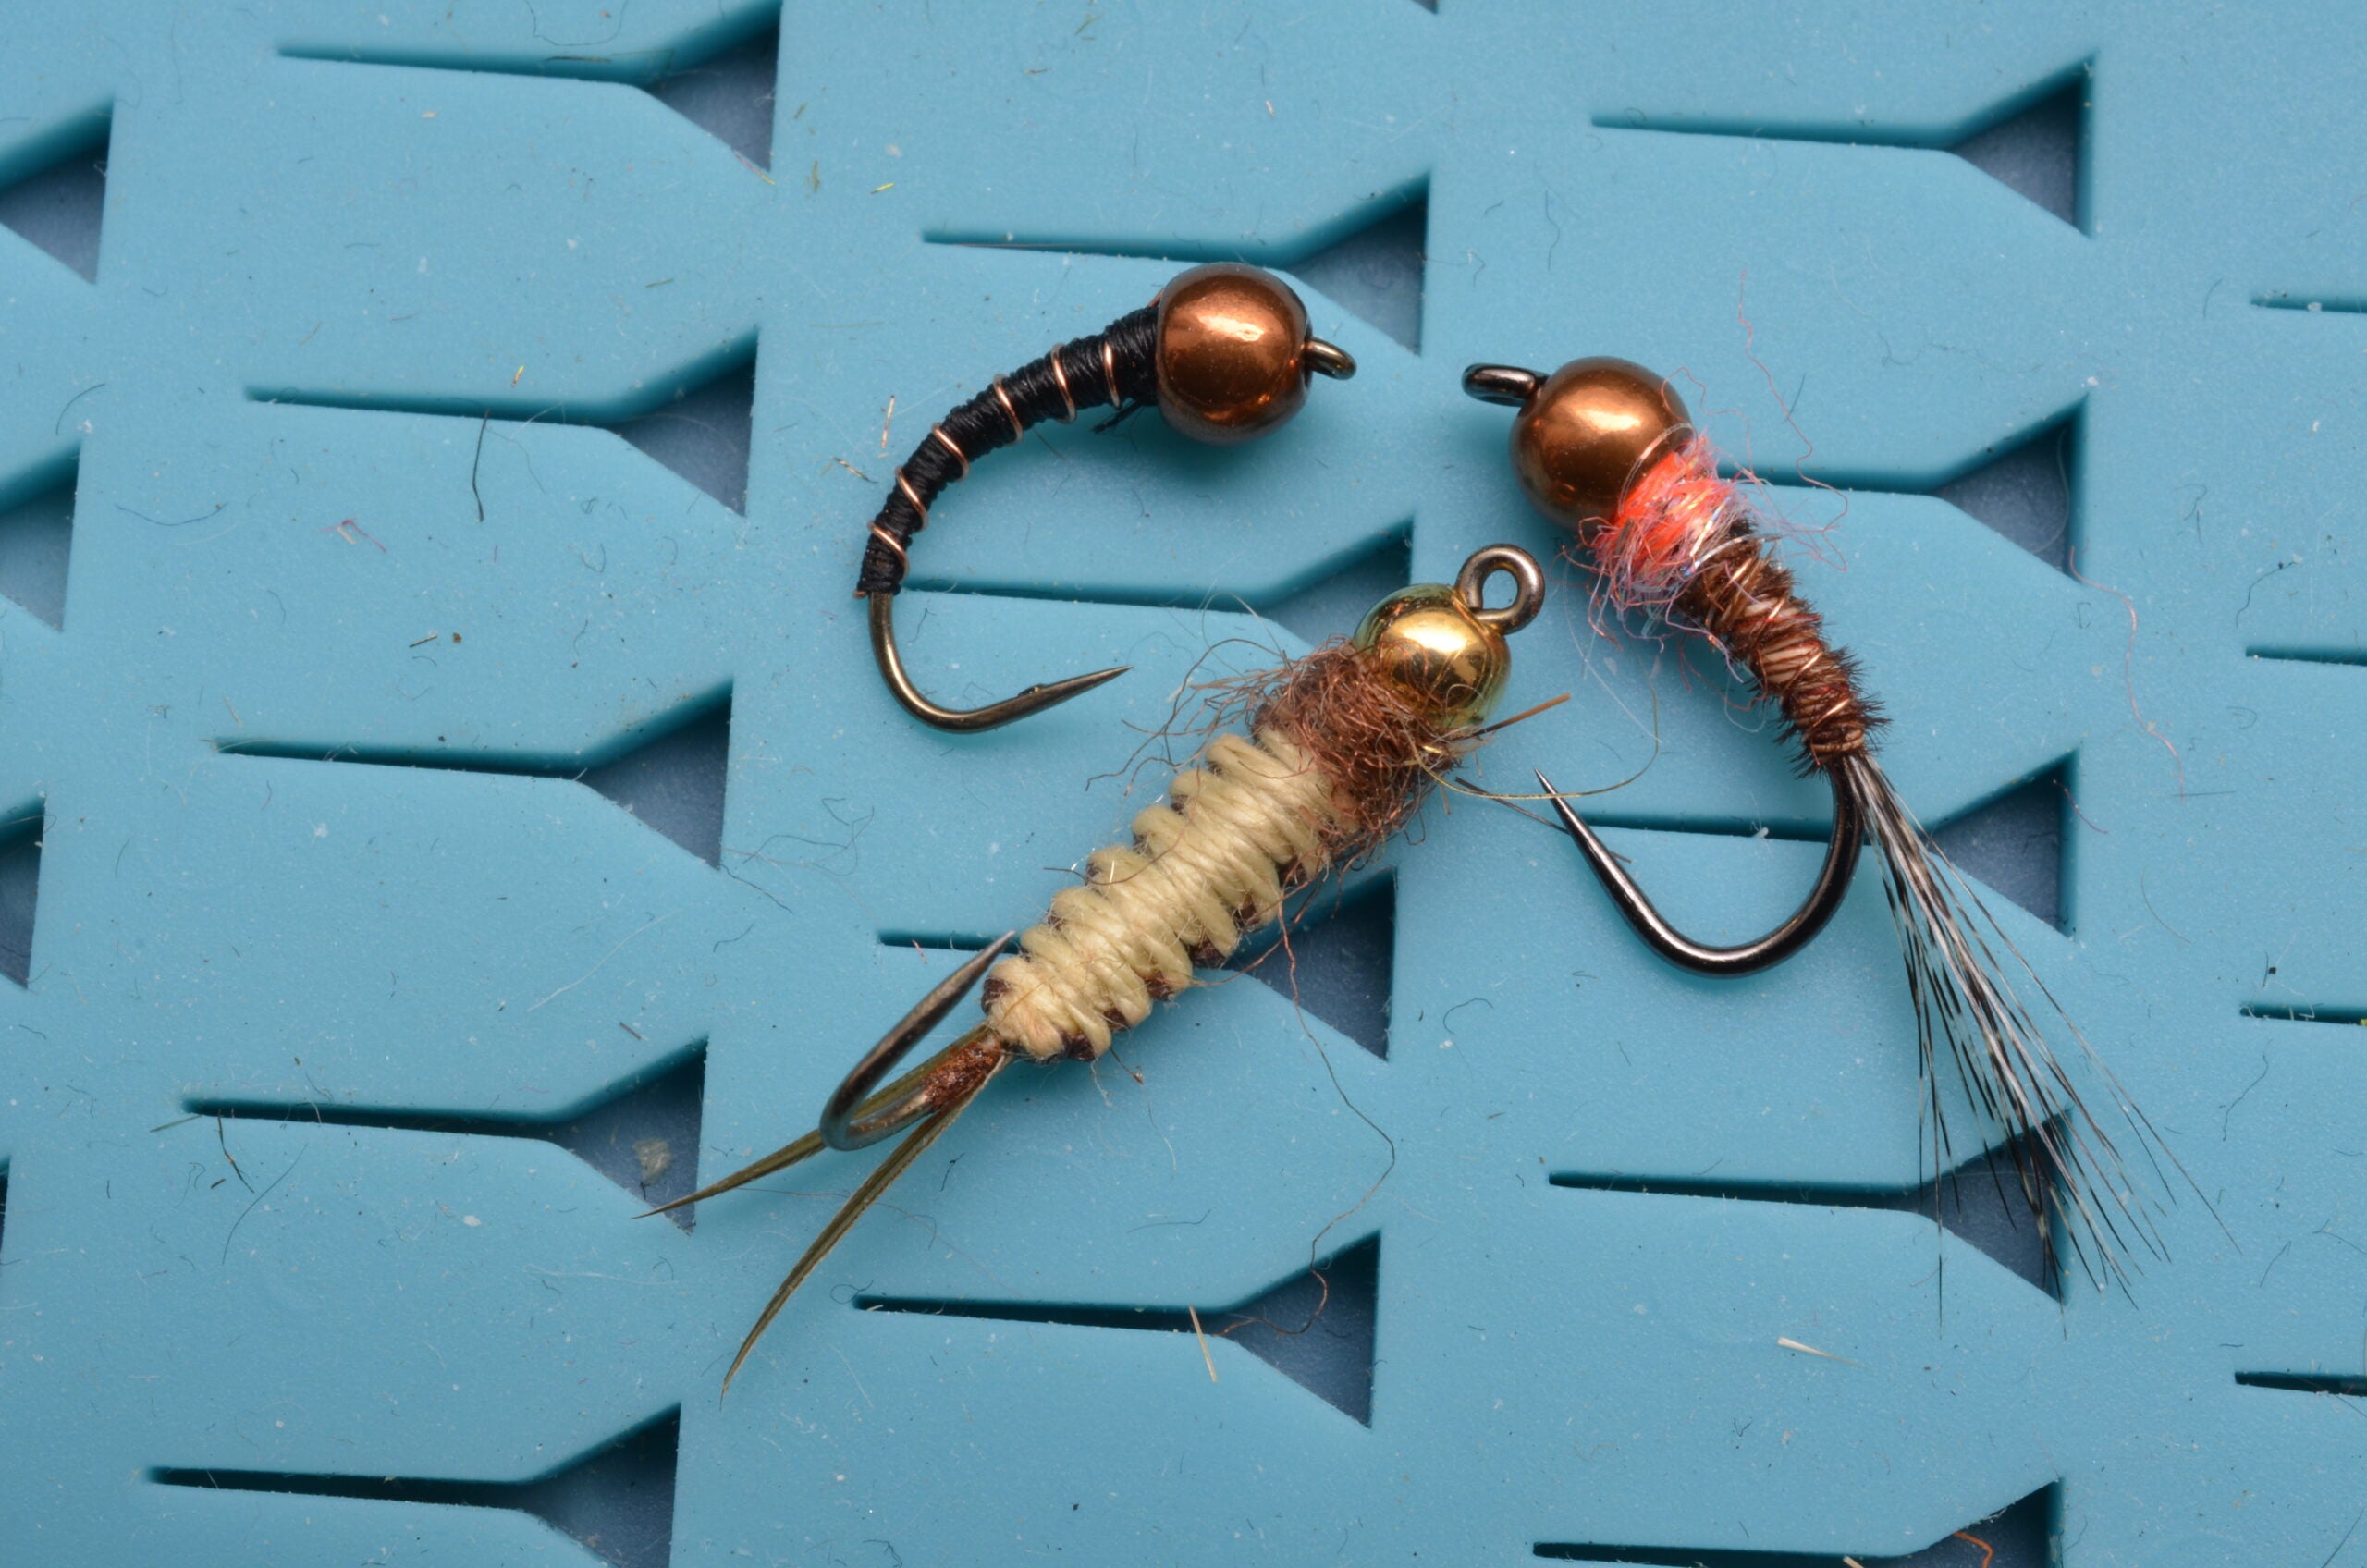 Euro Nymphing: Gear and Tips for Trout Fishing